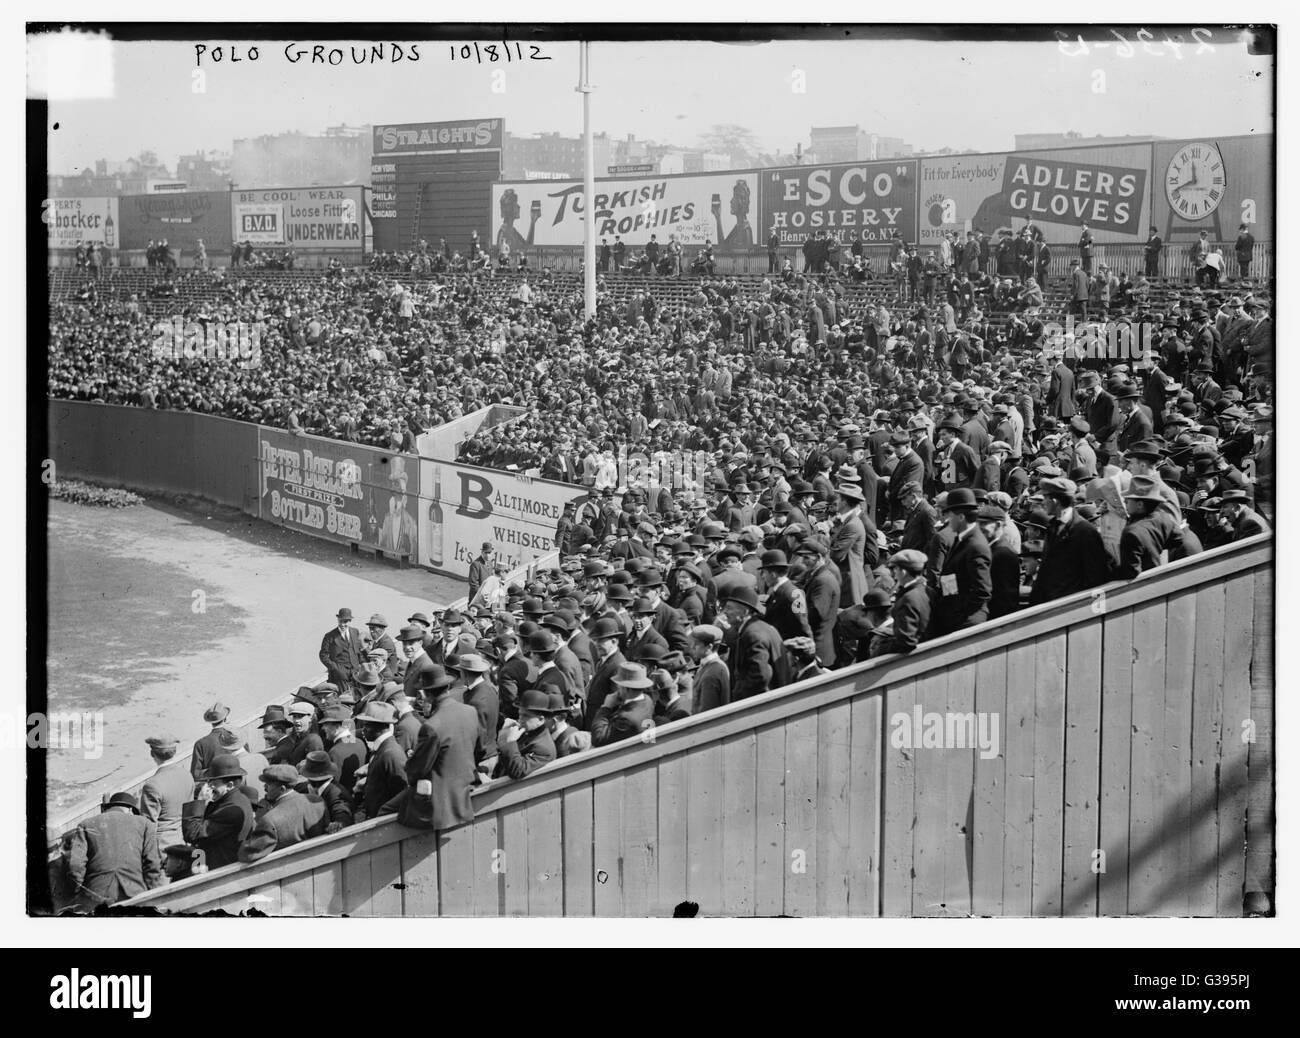 View of the right field grandstand at the Polo Grounds in New York during the 1912 baseball World Series. Stock Photo